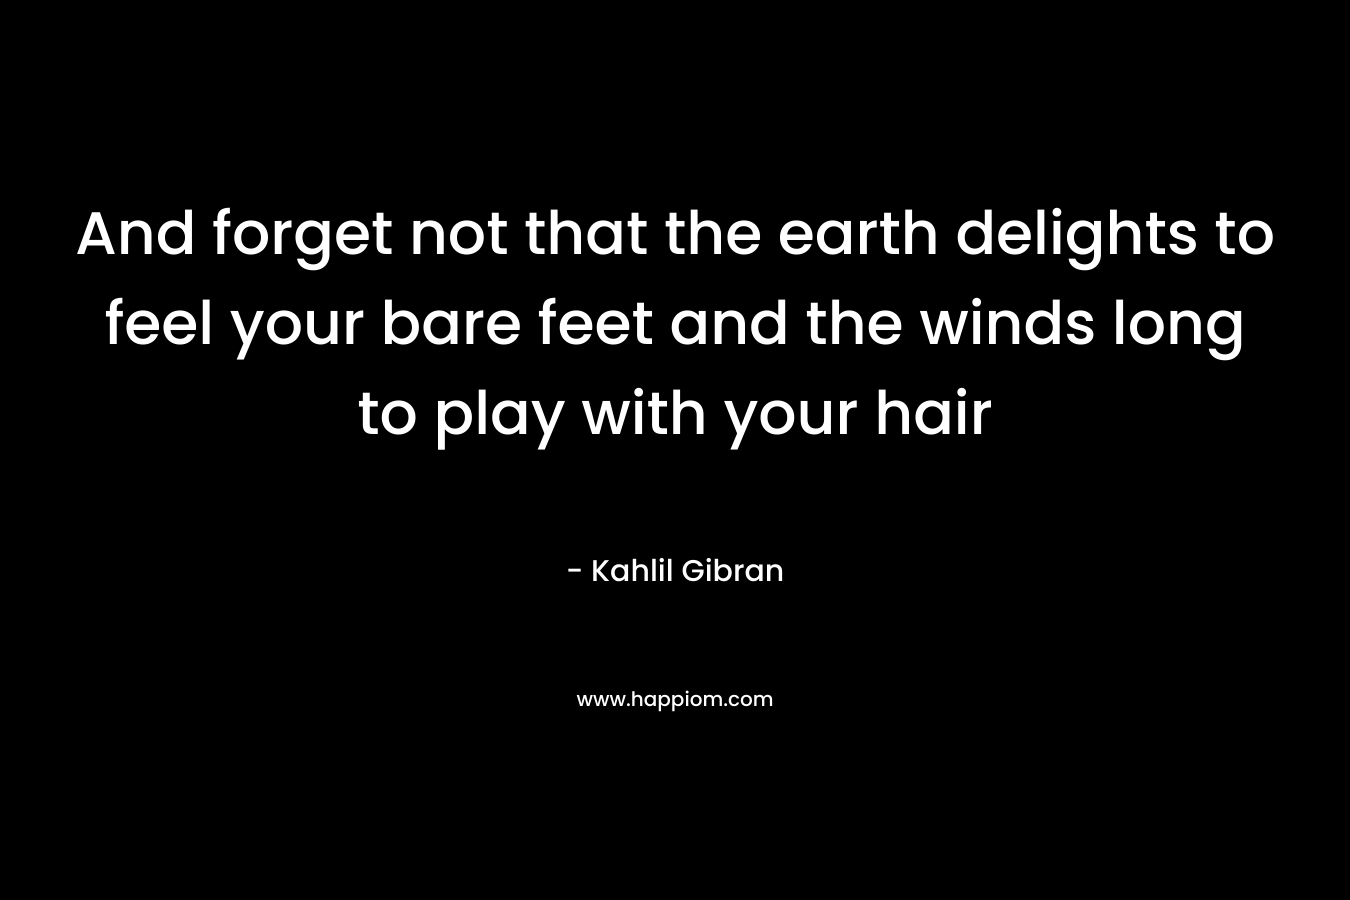 And forget not that the earth delights to feel your bare feet and the winds long to play with your hair